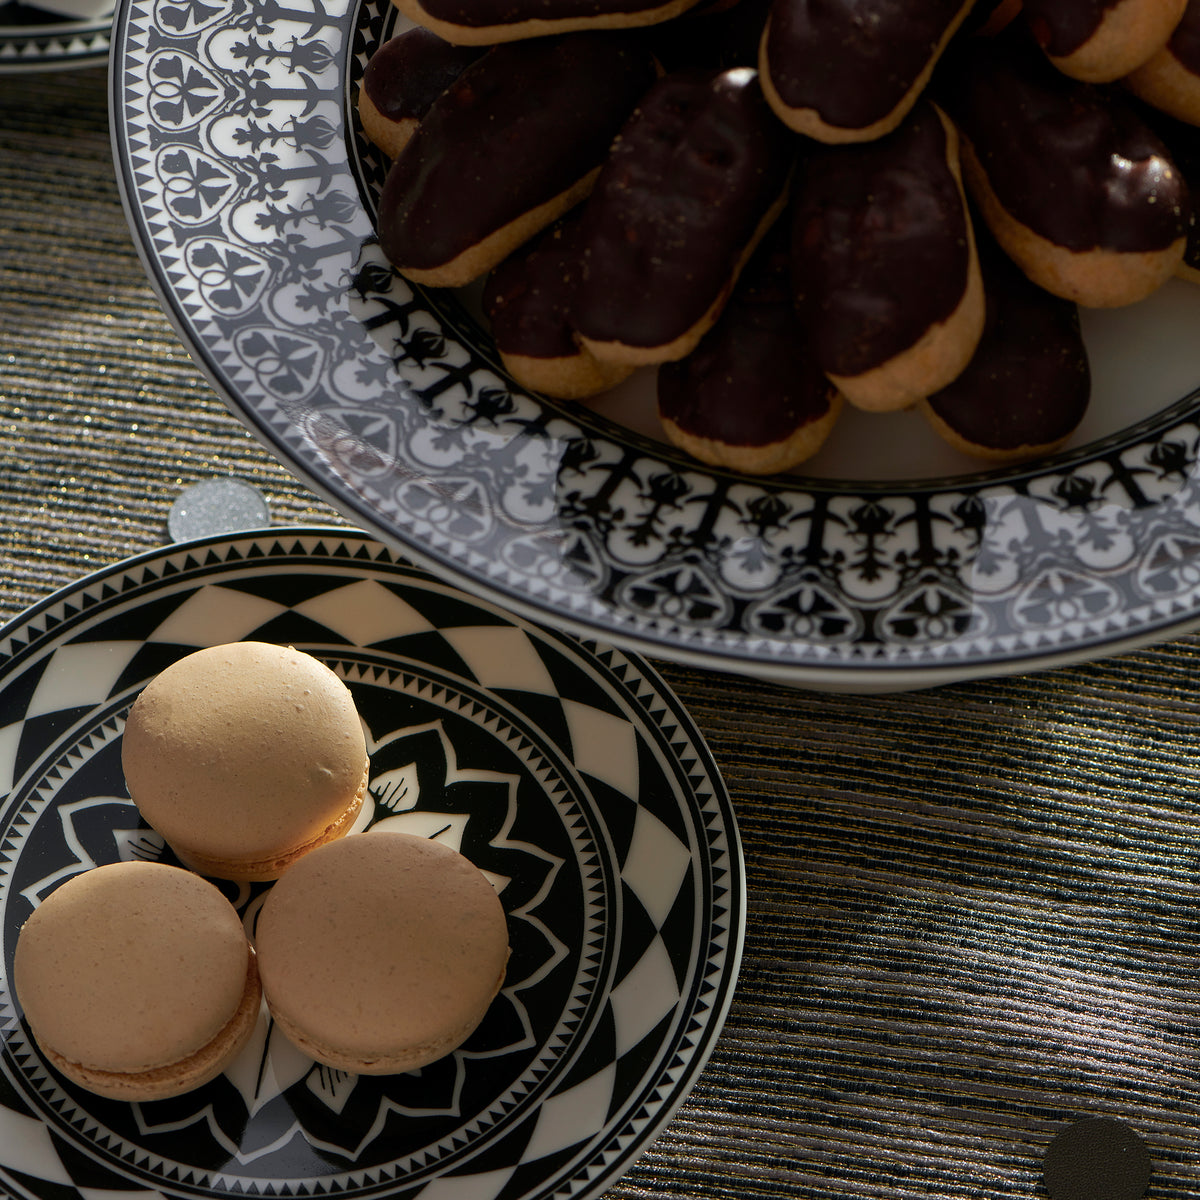 A plate of chocolate-covered eclairs is placed on a larger ornate plate, adorned with Moroccan patterns, while three beige macarons are positioned on a smaller decorative Caskata Artisanal Home Fez Small Plates nearby.